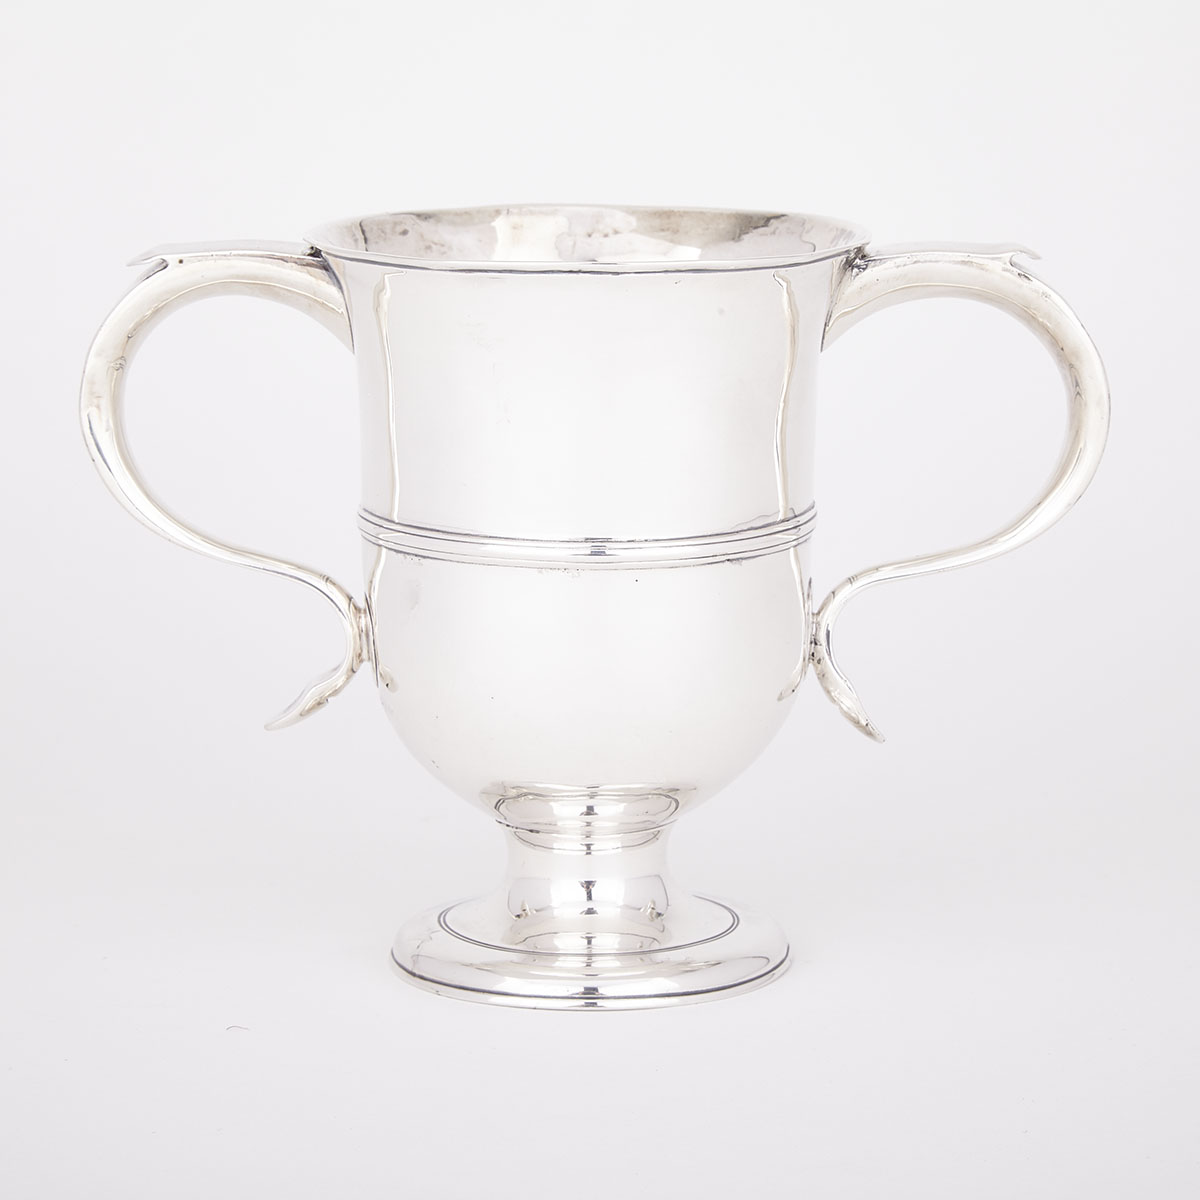 George III Silver Two-Handled Cup, probably William & Robert Peaston, London, 1762